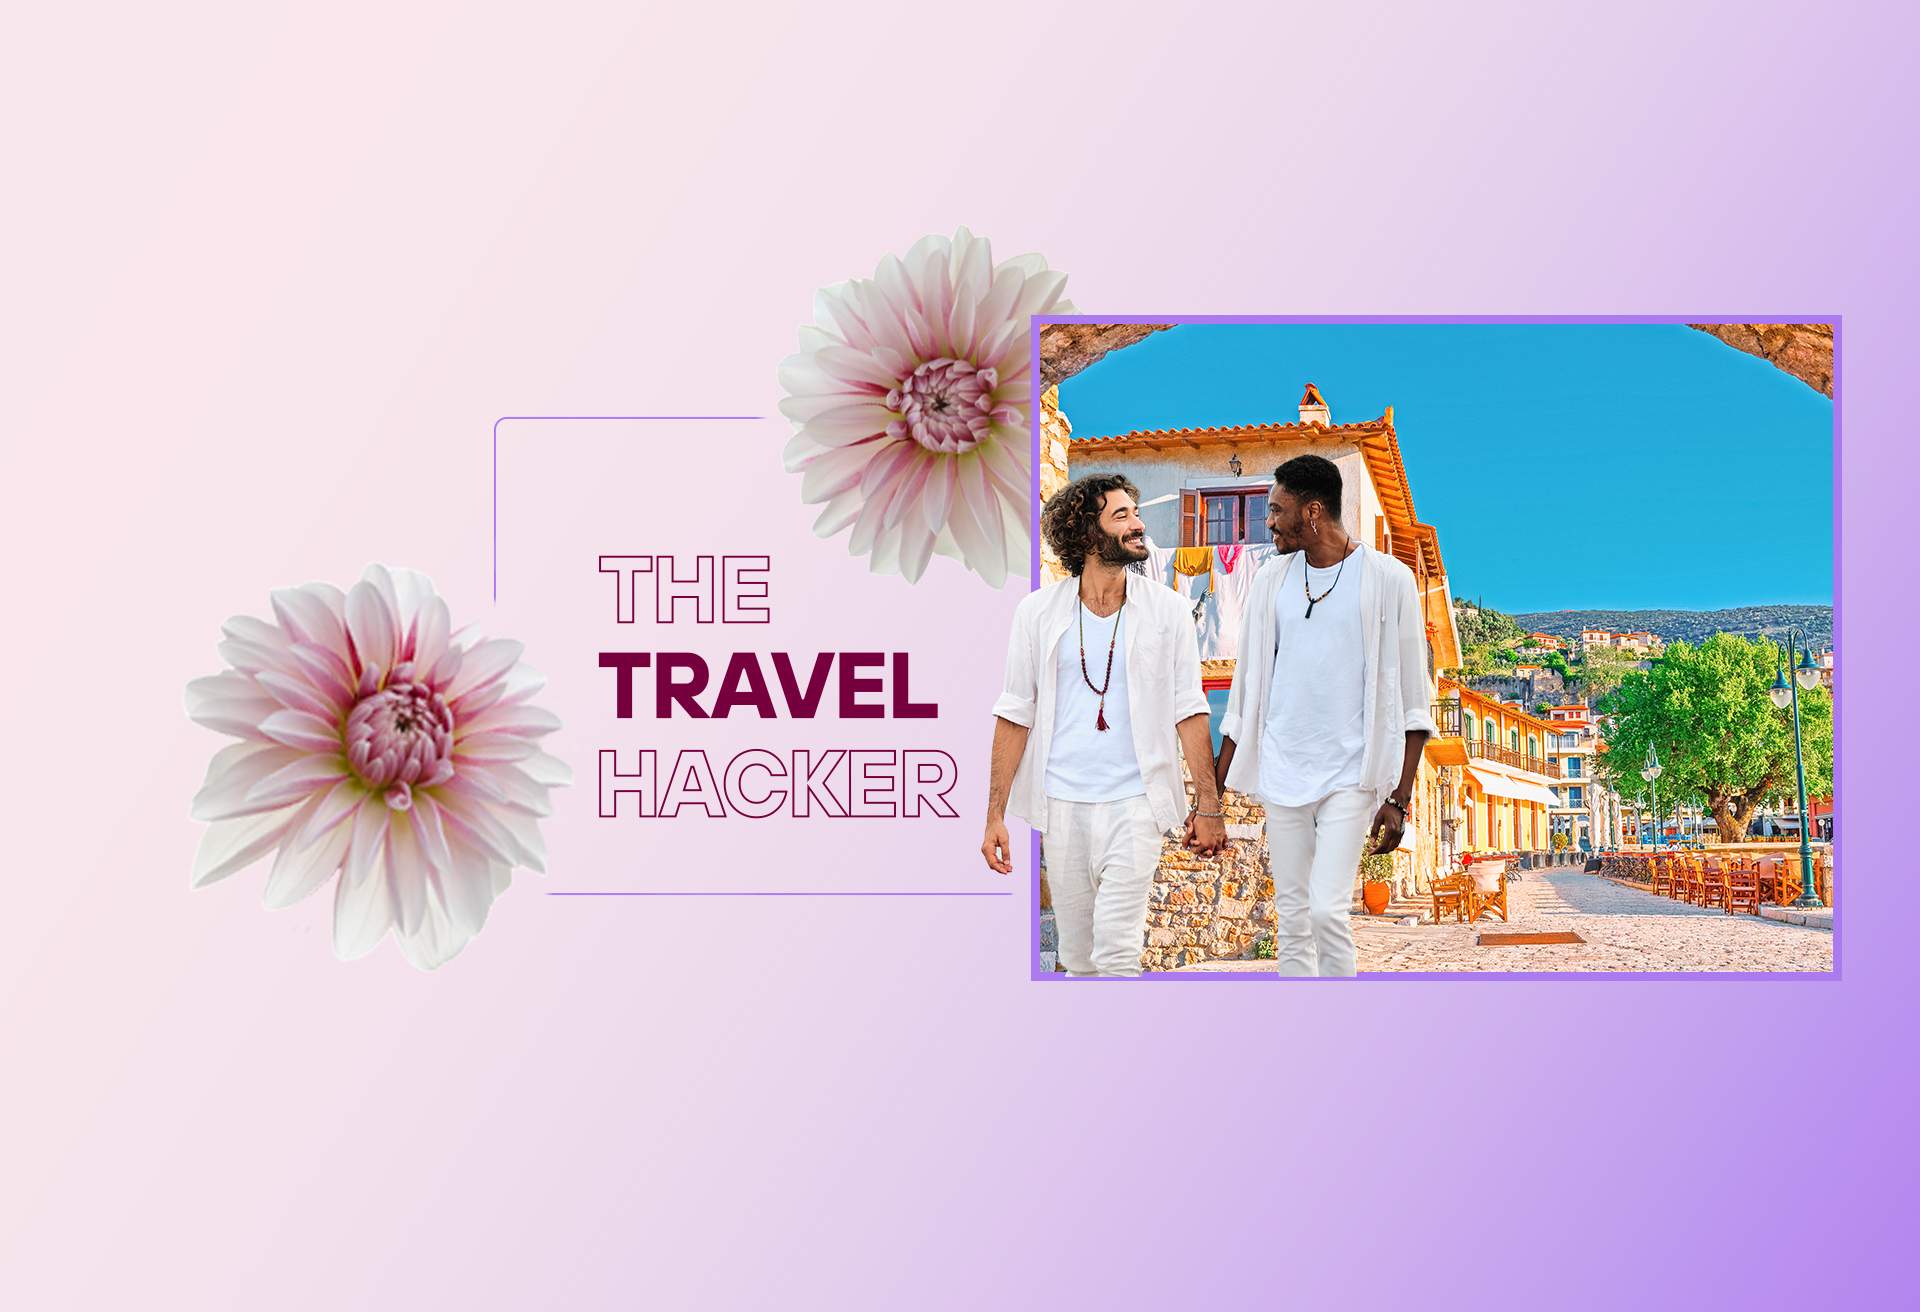 Graphic that consists of images and text. Image shows two men dressed in all-white holding hands and walking through town with Spanish-style architecture. Pink flowers surround text that reads: “The Travel Hacker.”